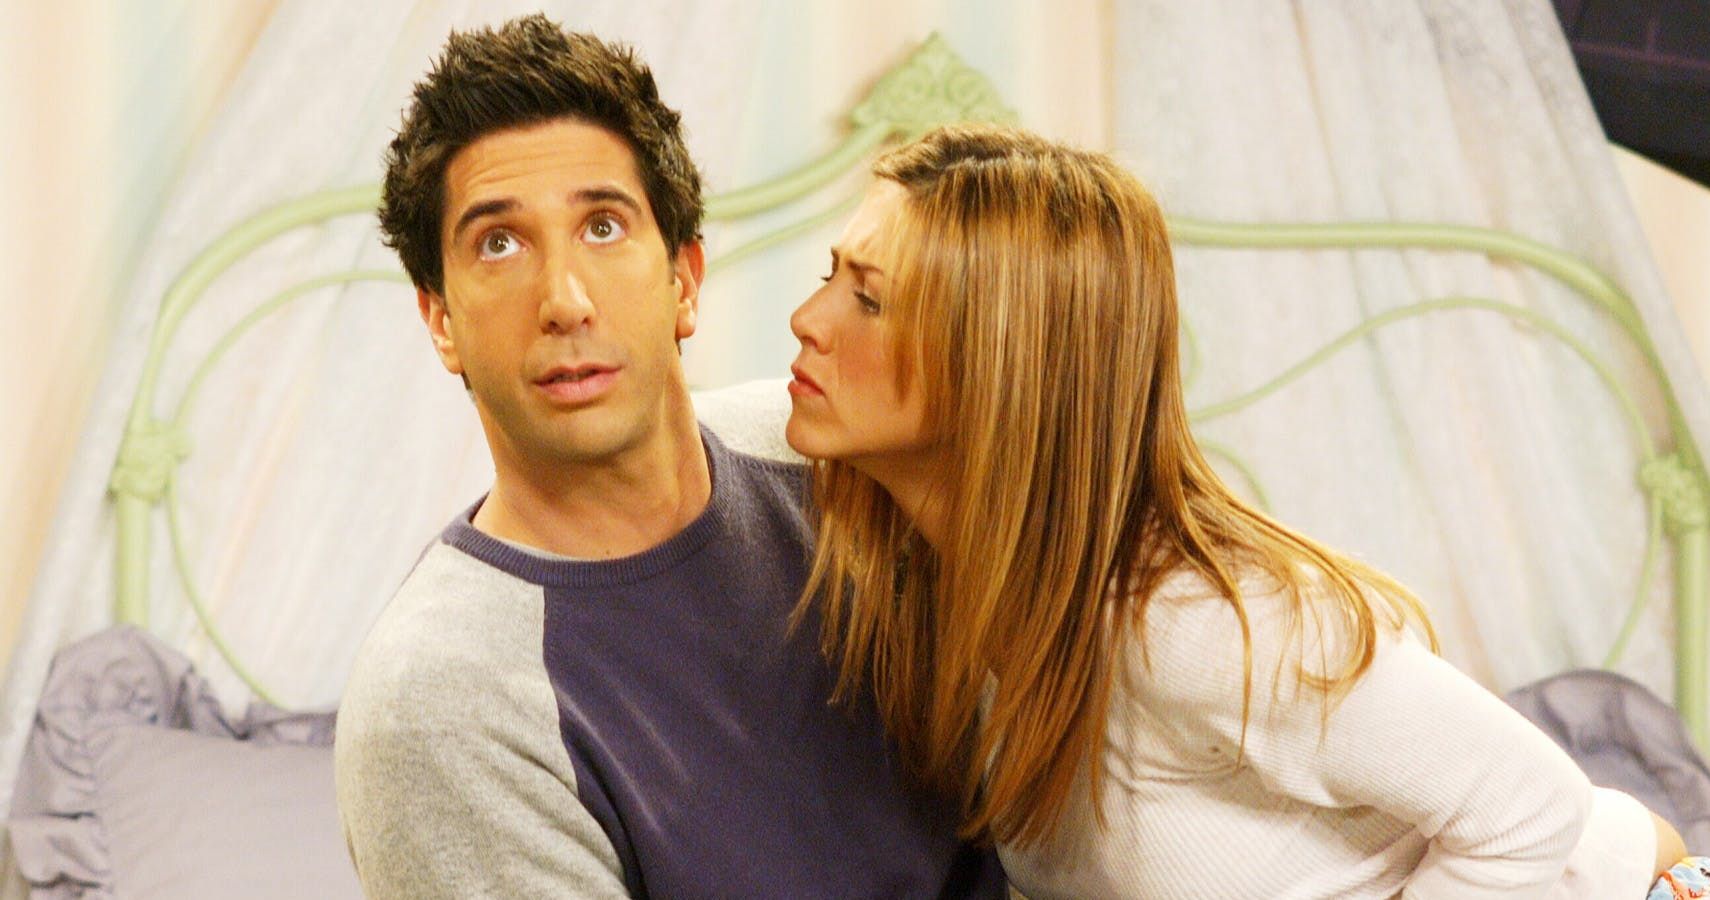 Friends 25 Things About Rachel And Ross Relationship That Make No Sense